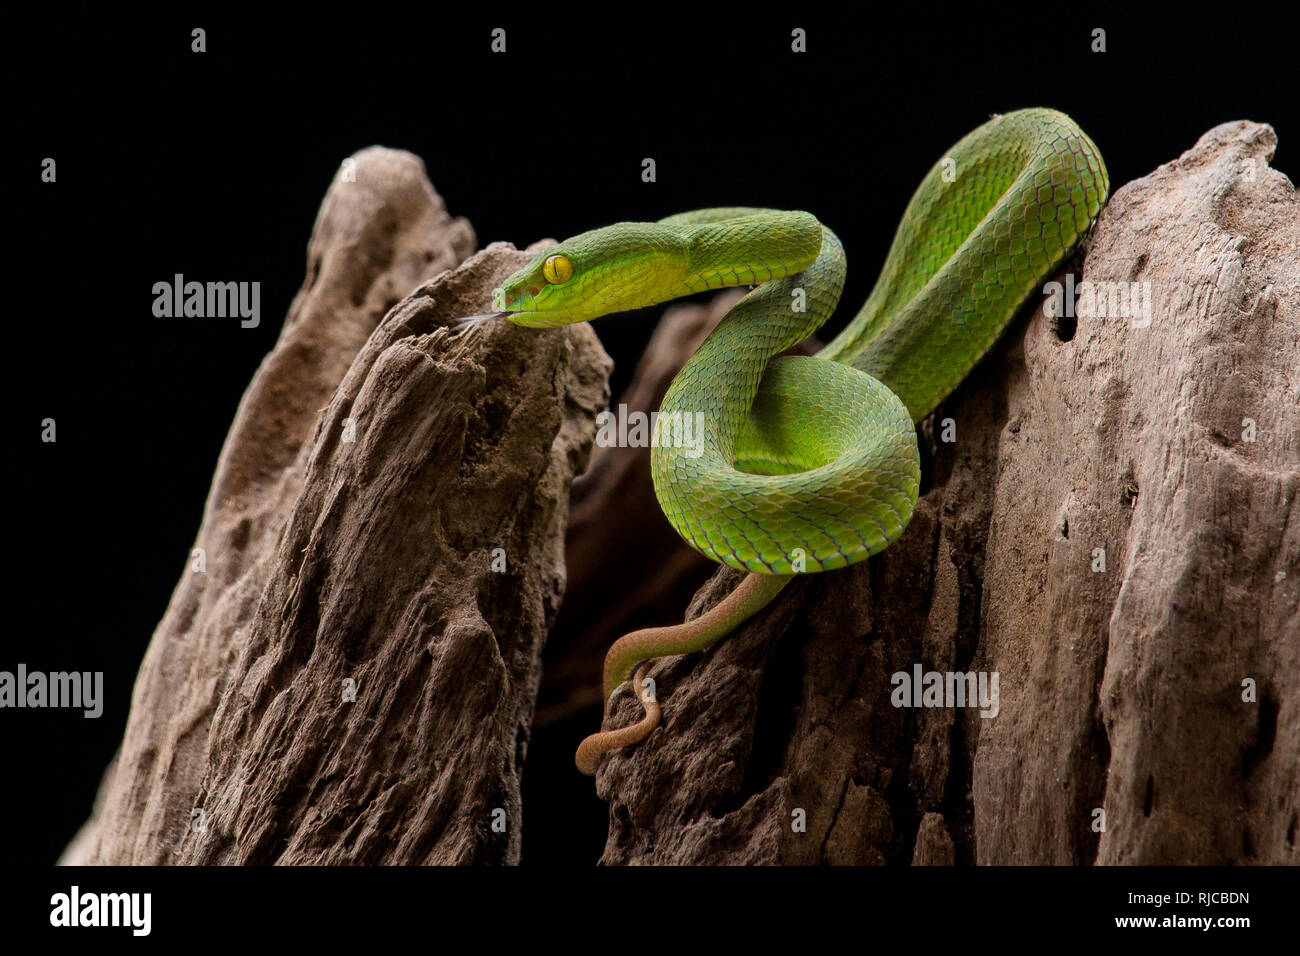 Mangrove pit viper snake on a rock, Indonesia Stock Photo